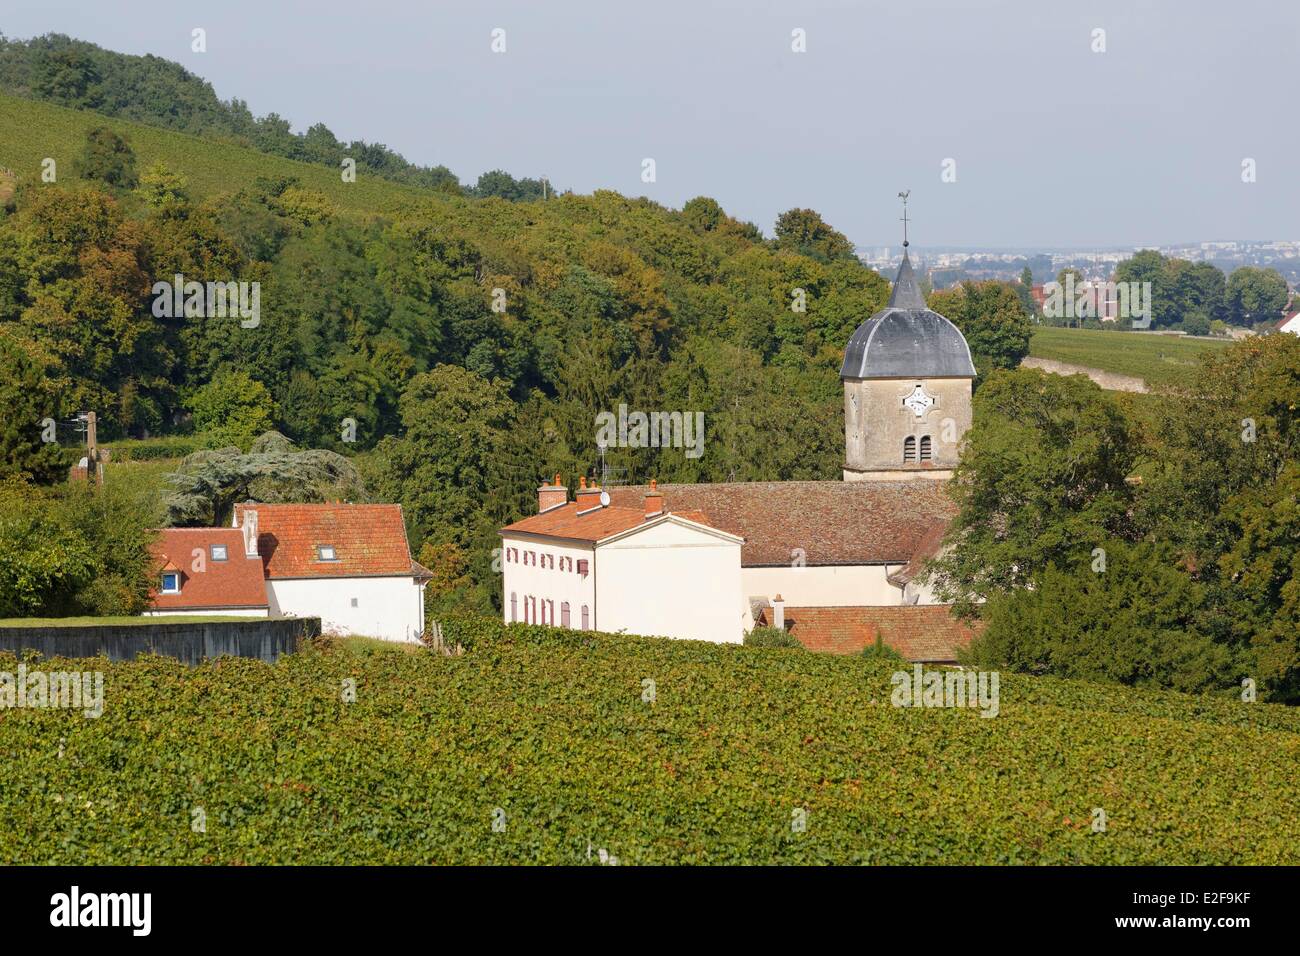 France, Cote d'Or, Chambolle Musigny, Bourgogne vineyard, cote de Nuits vineyard Stock Photo